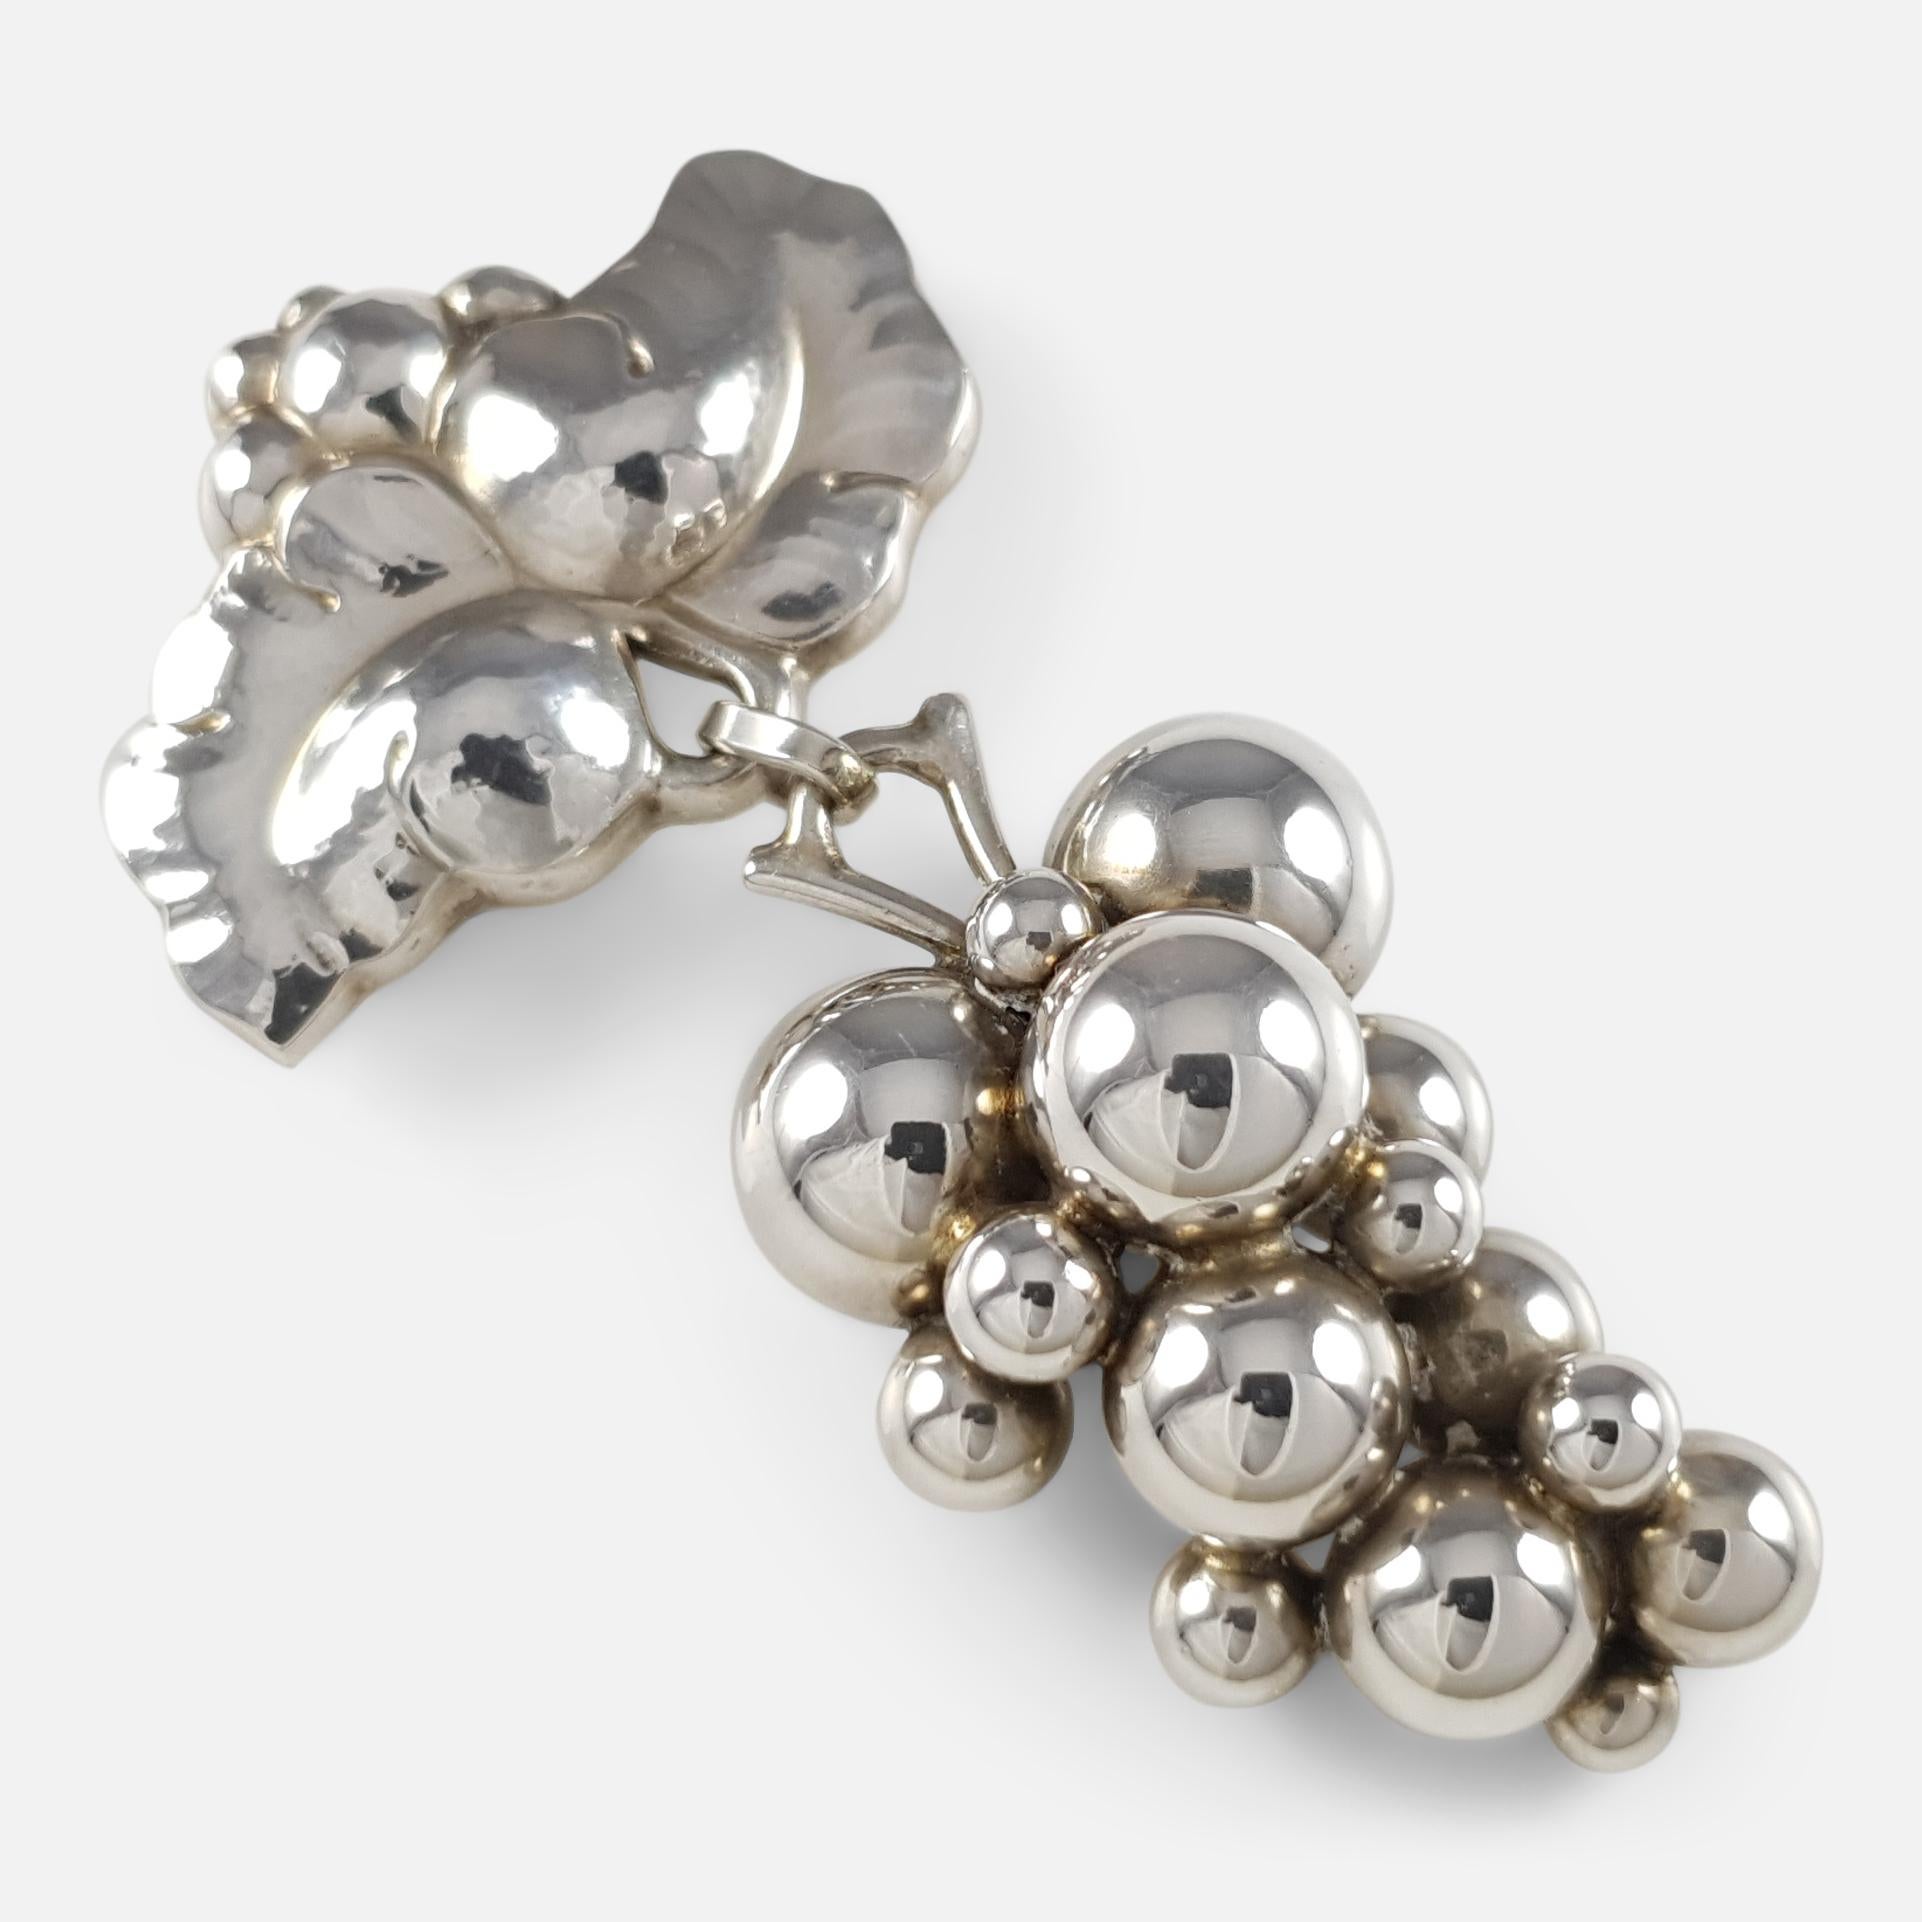 Item: - A superb Georg Jensen sterling silver moonlight grapes brooch, design #217 B. The brooch is designed by Harald Nielsen for Georg Jensen. Stamped Georg Jensen within dotted oval mark, '925S', and 'Denmark'.  The brooch is UK hallmarked,